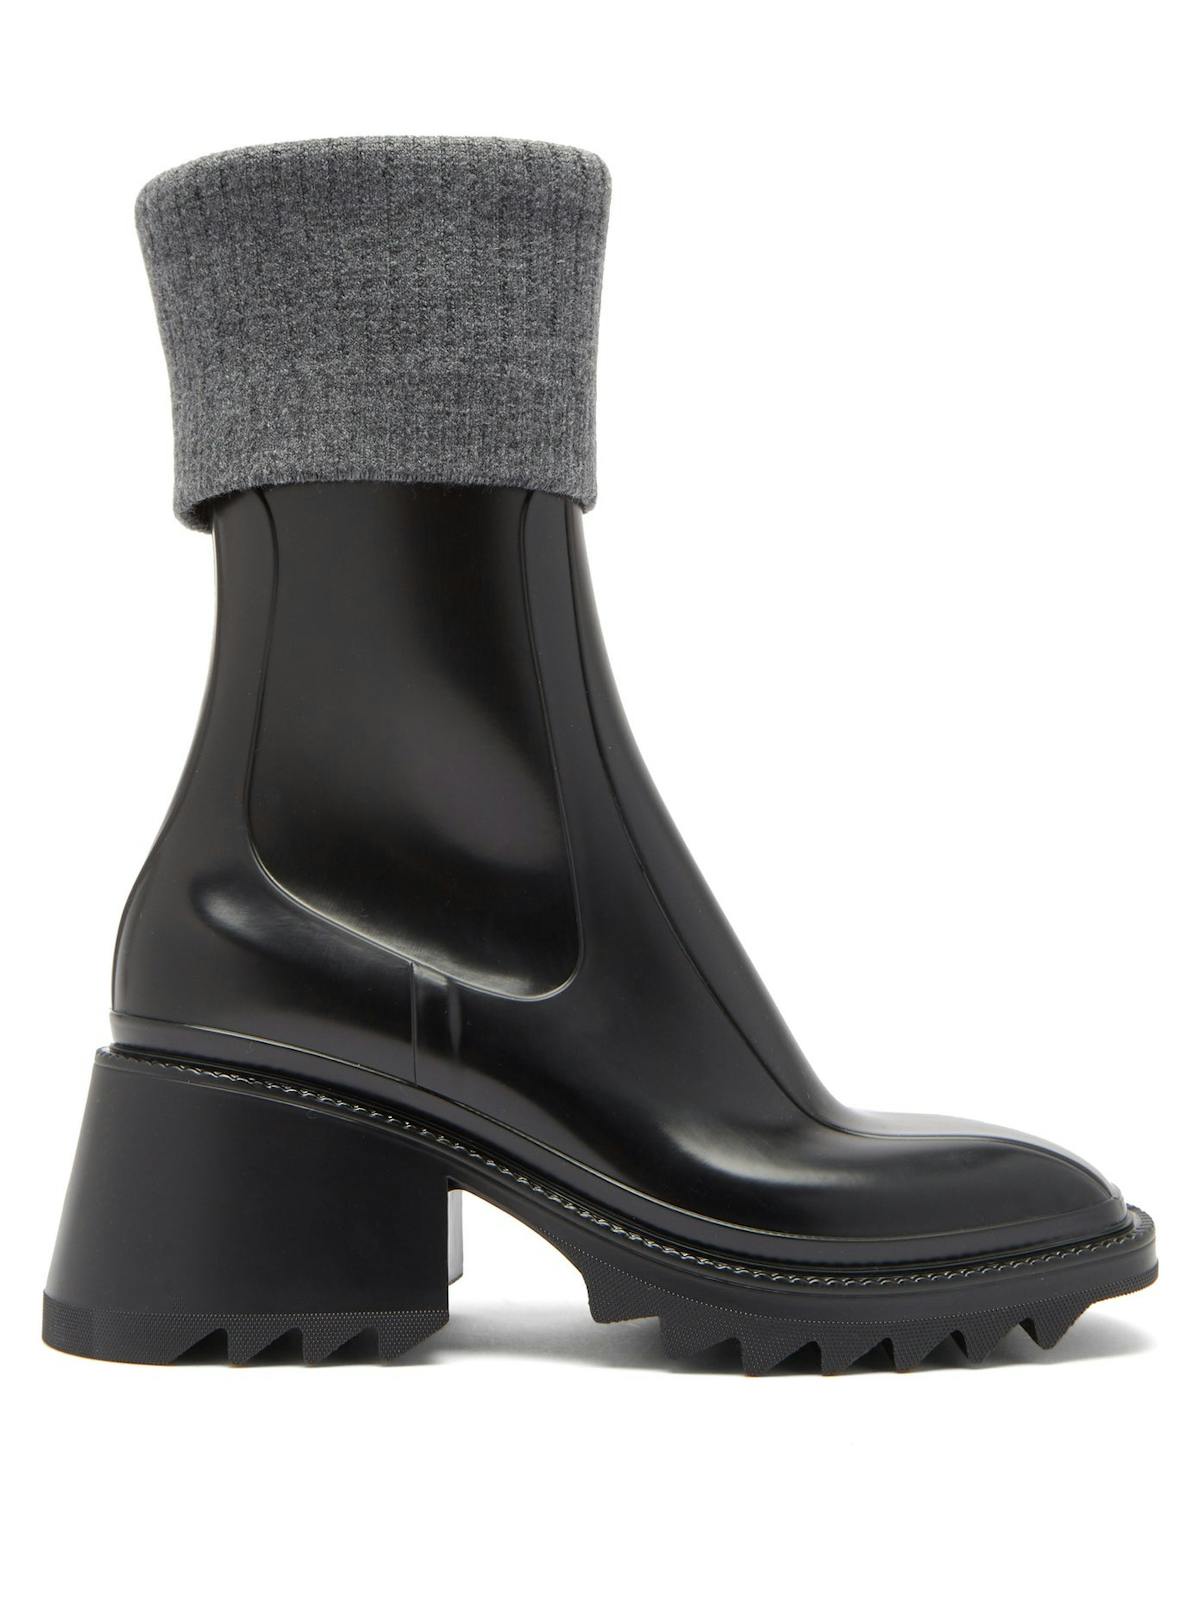 Best rubber wellington boots to buy now